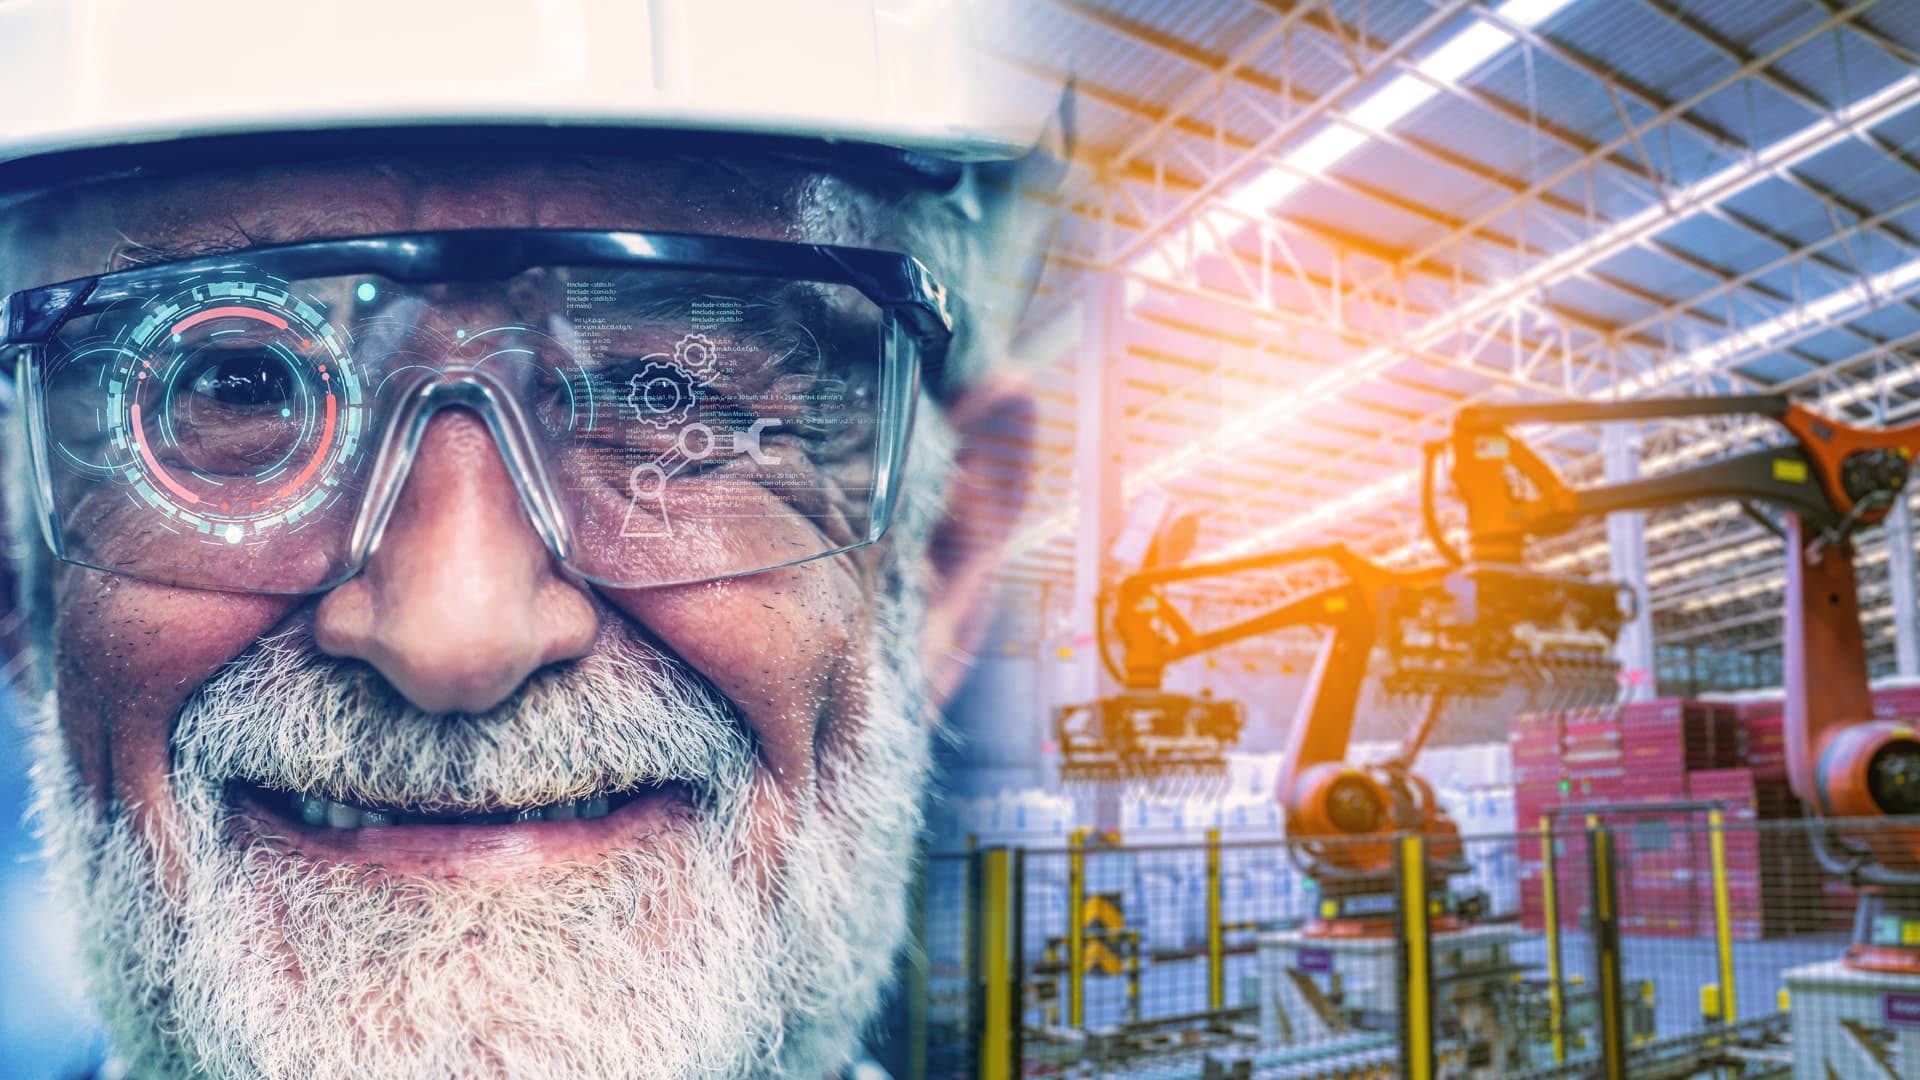 11 Leading Benefits of IIoT in Manufacturing